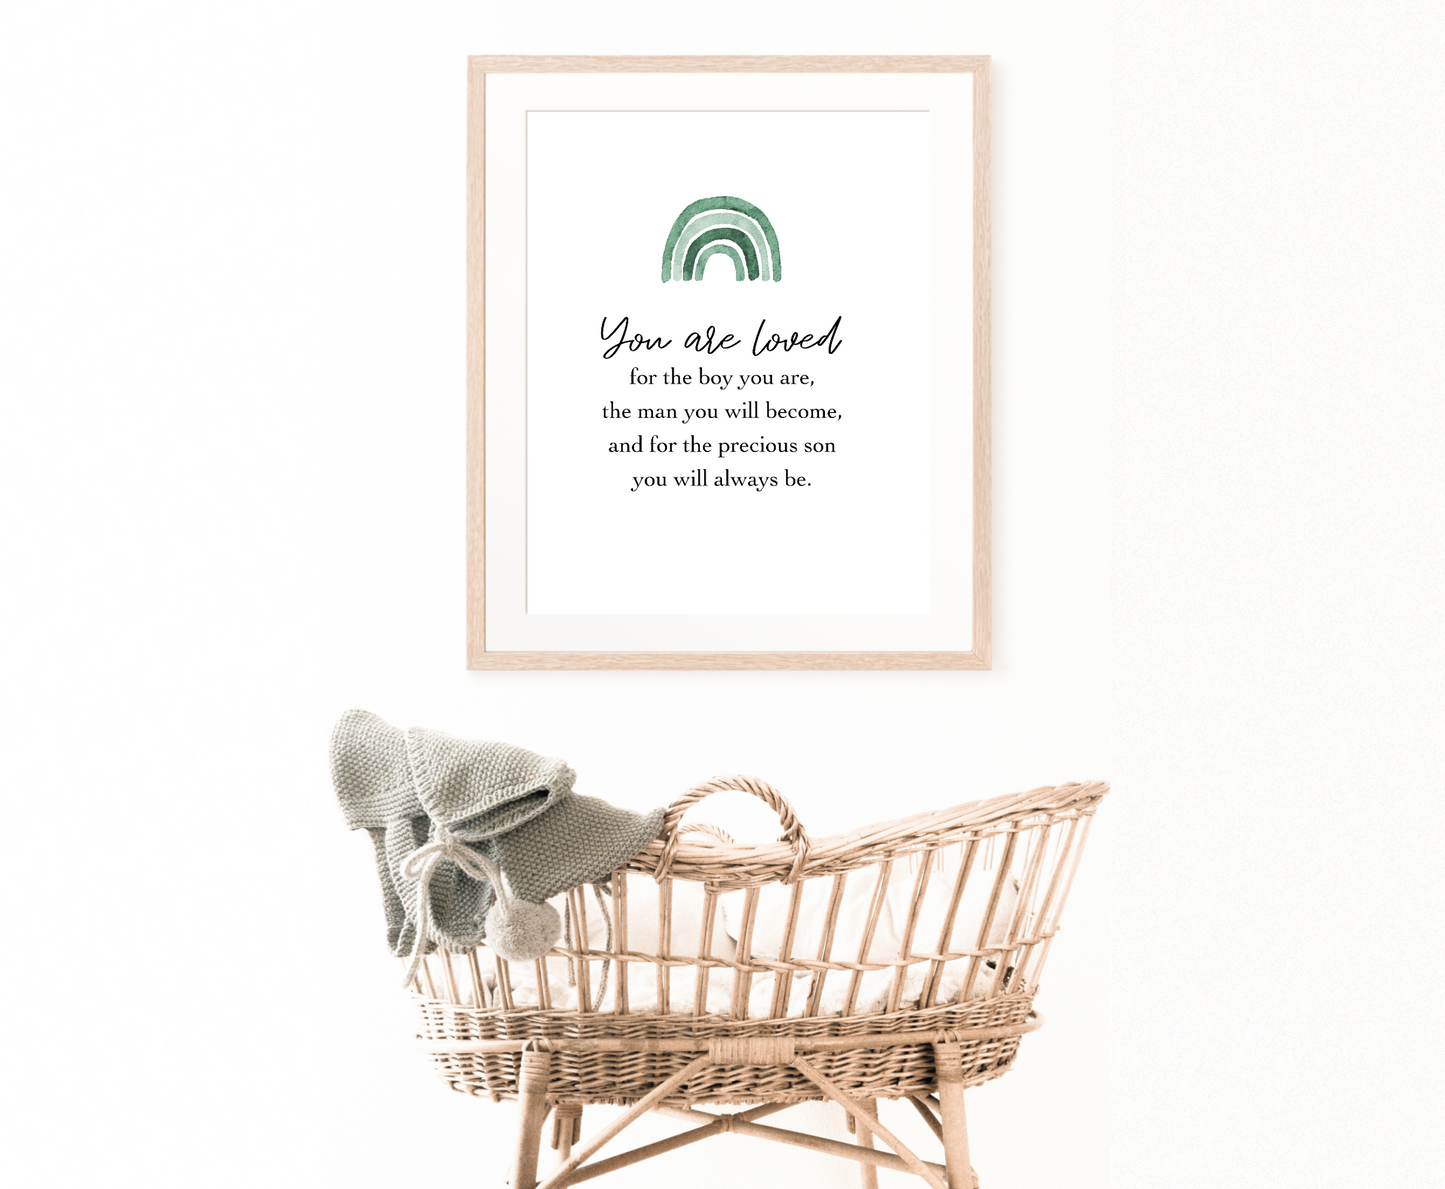 An image showing a cradle with a frame hung on the wall behind it. The frame shows a graphic for a little boy’s room that has an ombre green rainbow design and includes the following “You are loved, for the boy you are, the man you will become, and for the precious son you will always be.” 